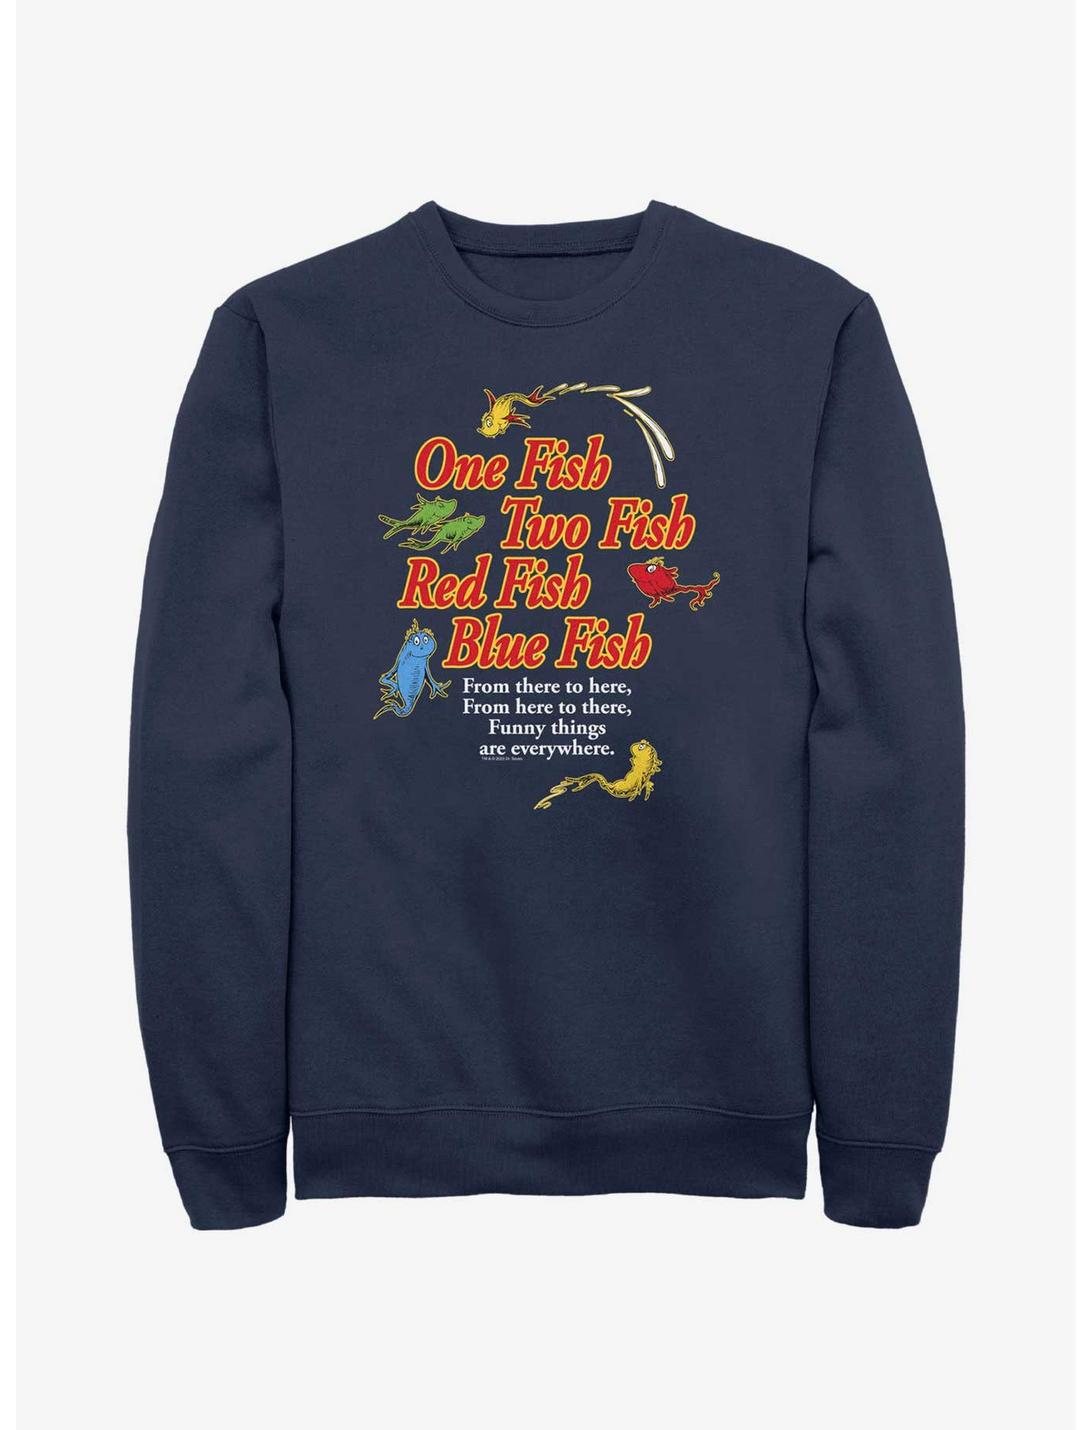 Dr. Seuss's One Fish, Two Fish, Red Fish, Blue Fish Funny Things Are Everywhere Sweatshirt, NAVY, hi-res